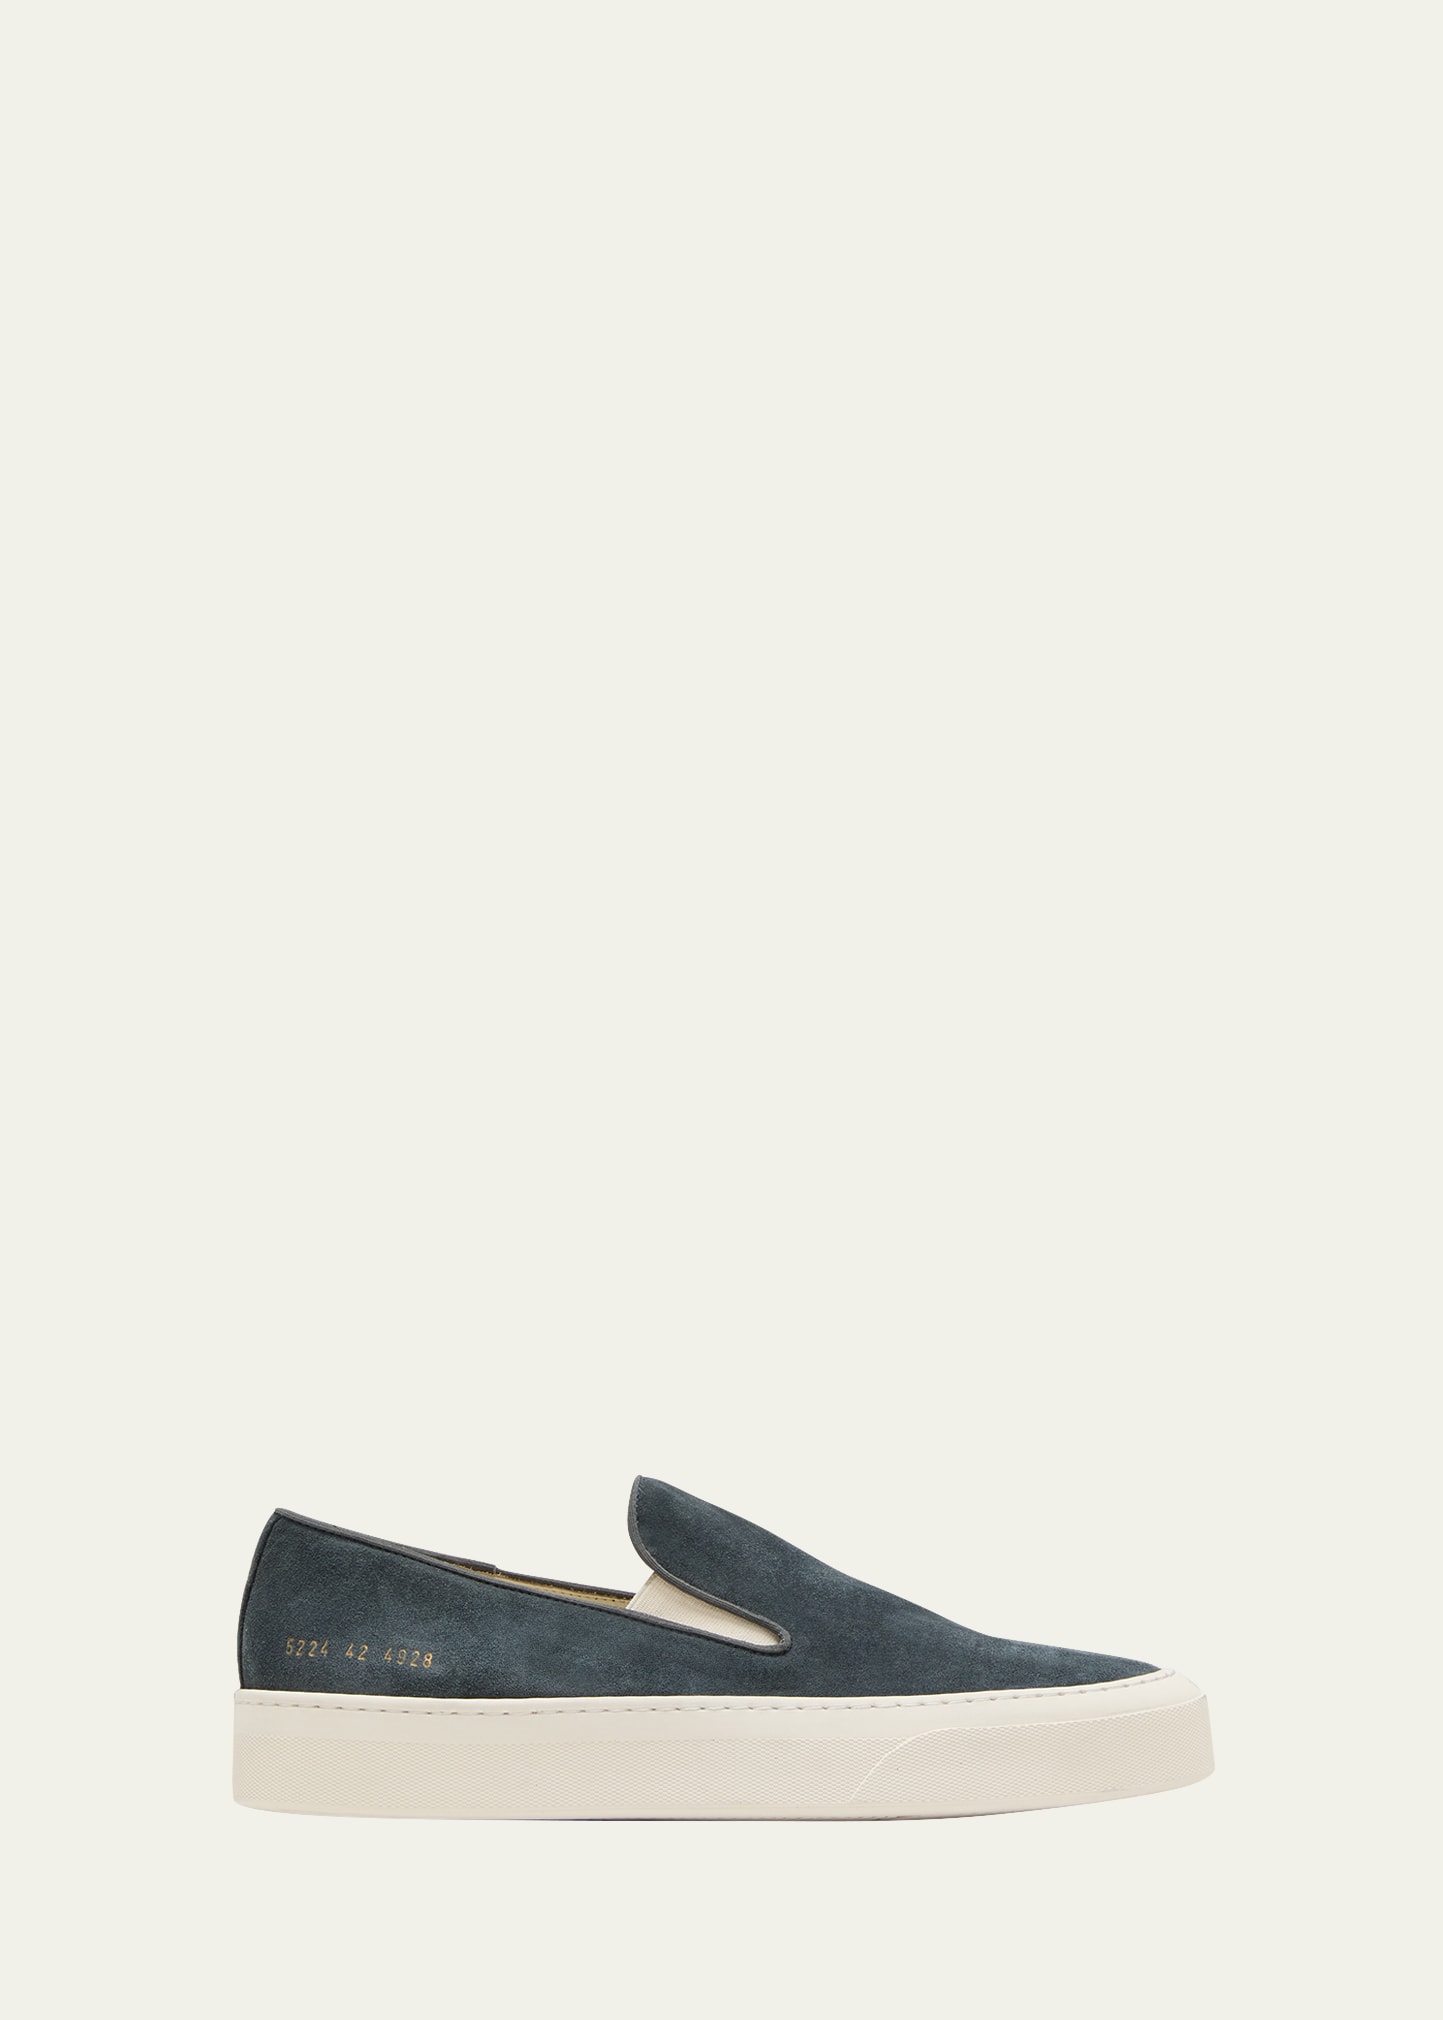 Shop Common Projects Men's Suede Slip-on Sneakers In Navy